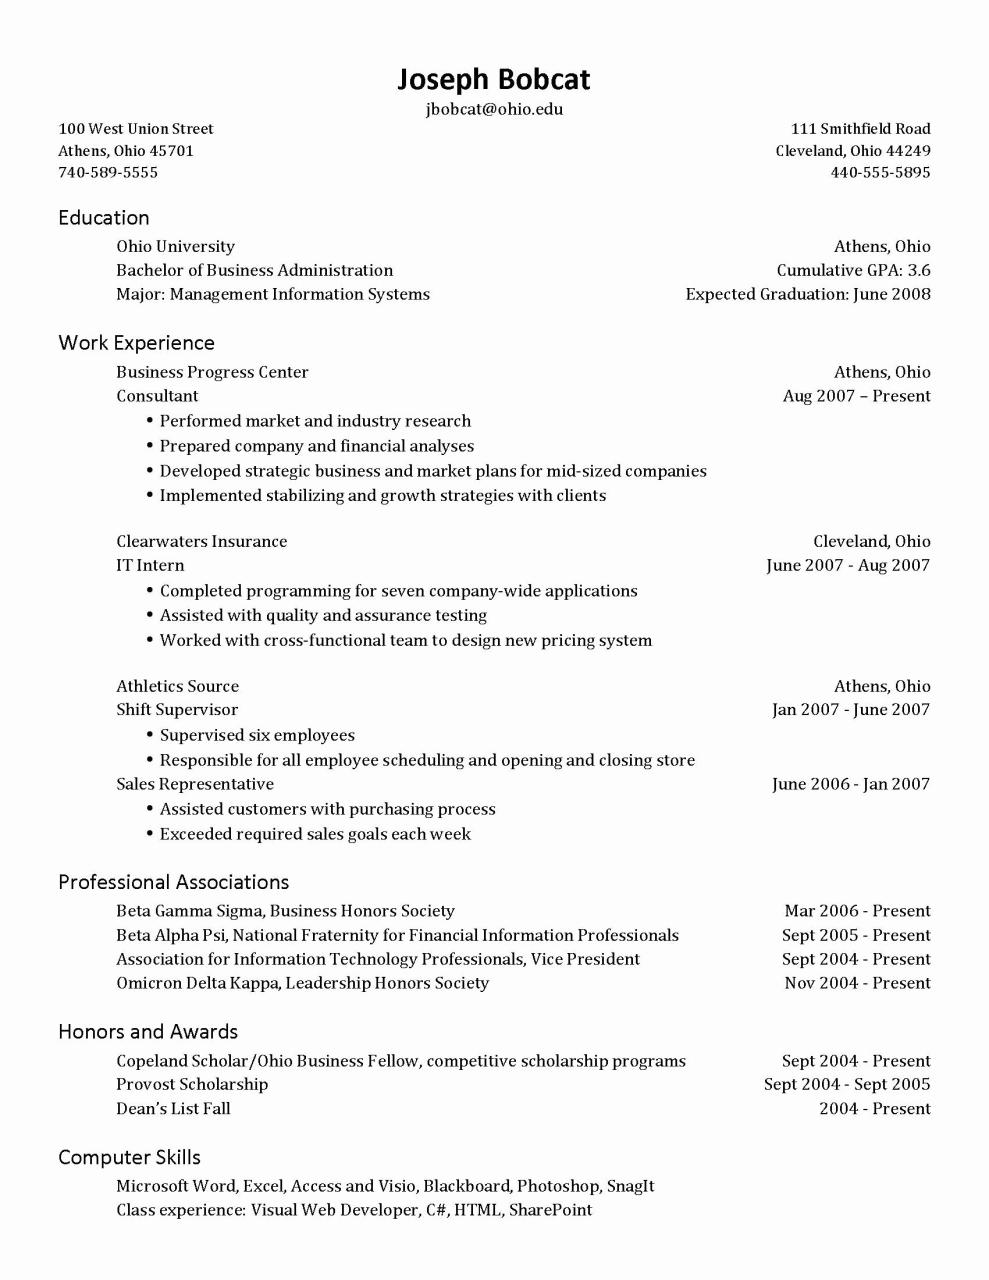 How To Show Graduation Date On Resume